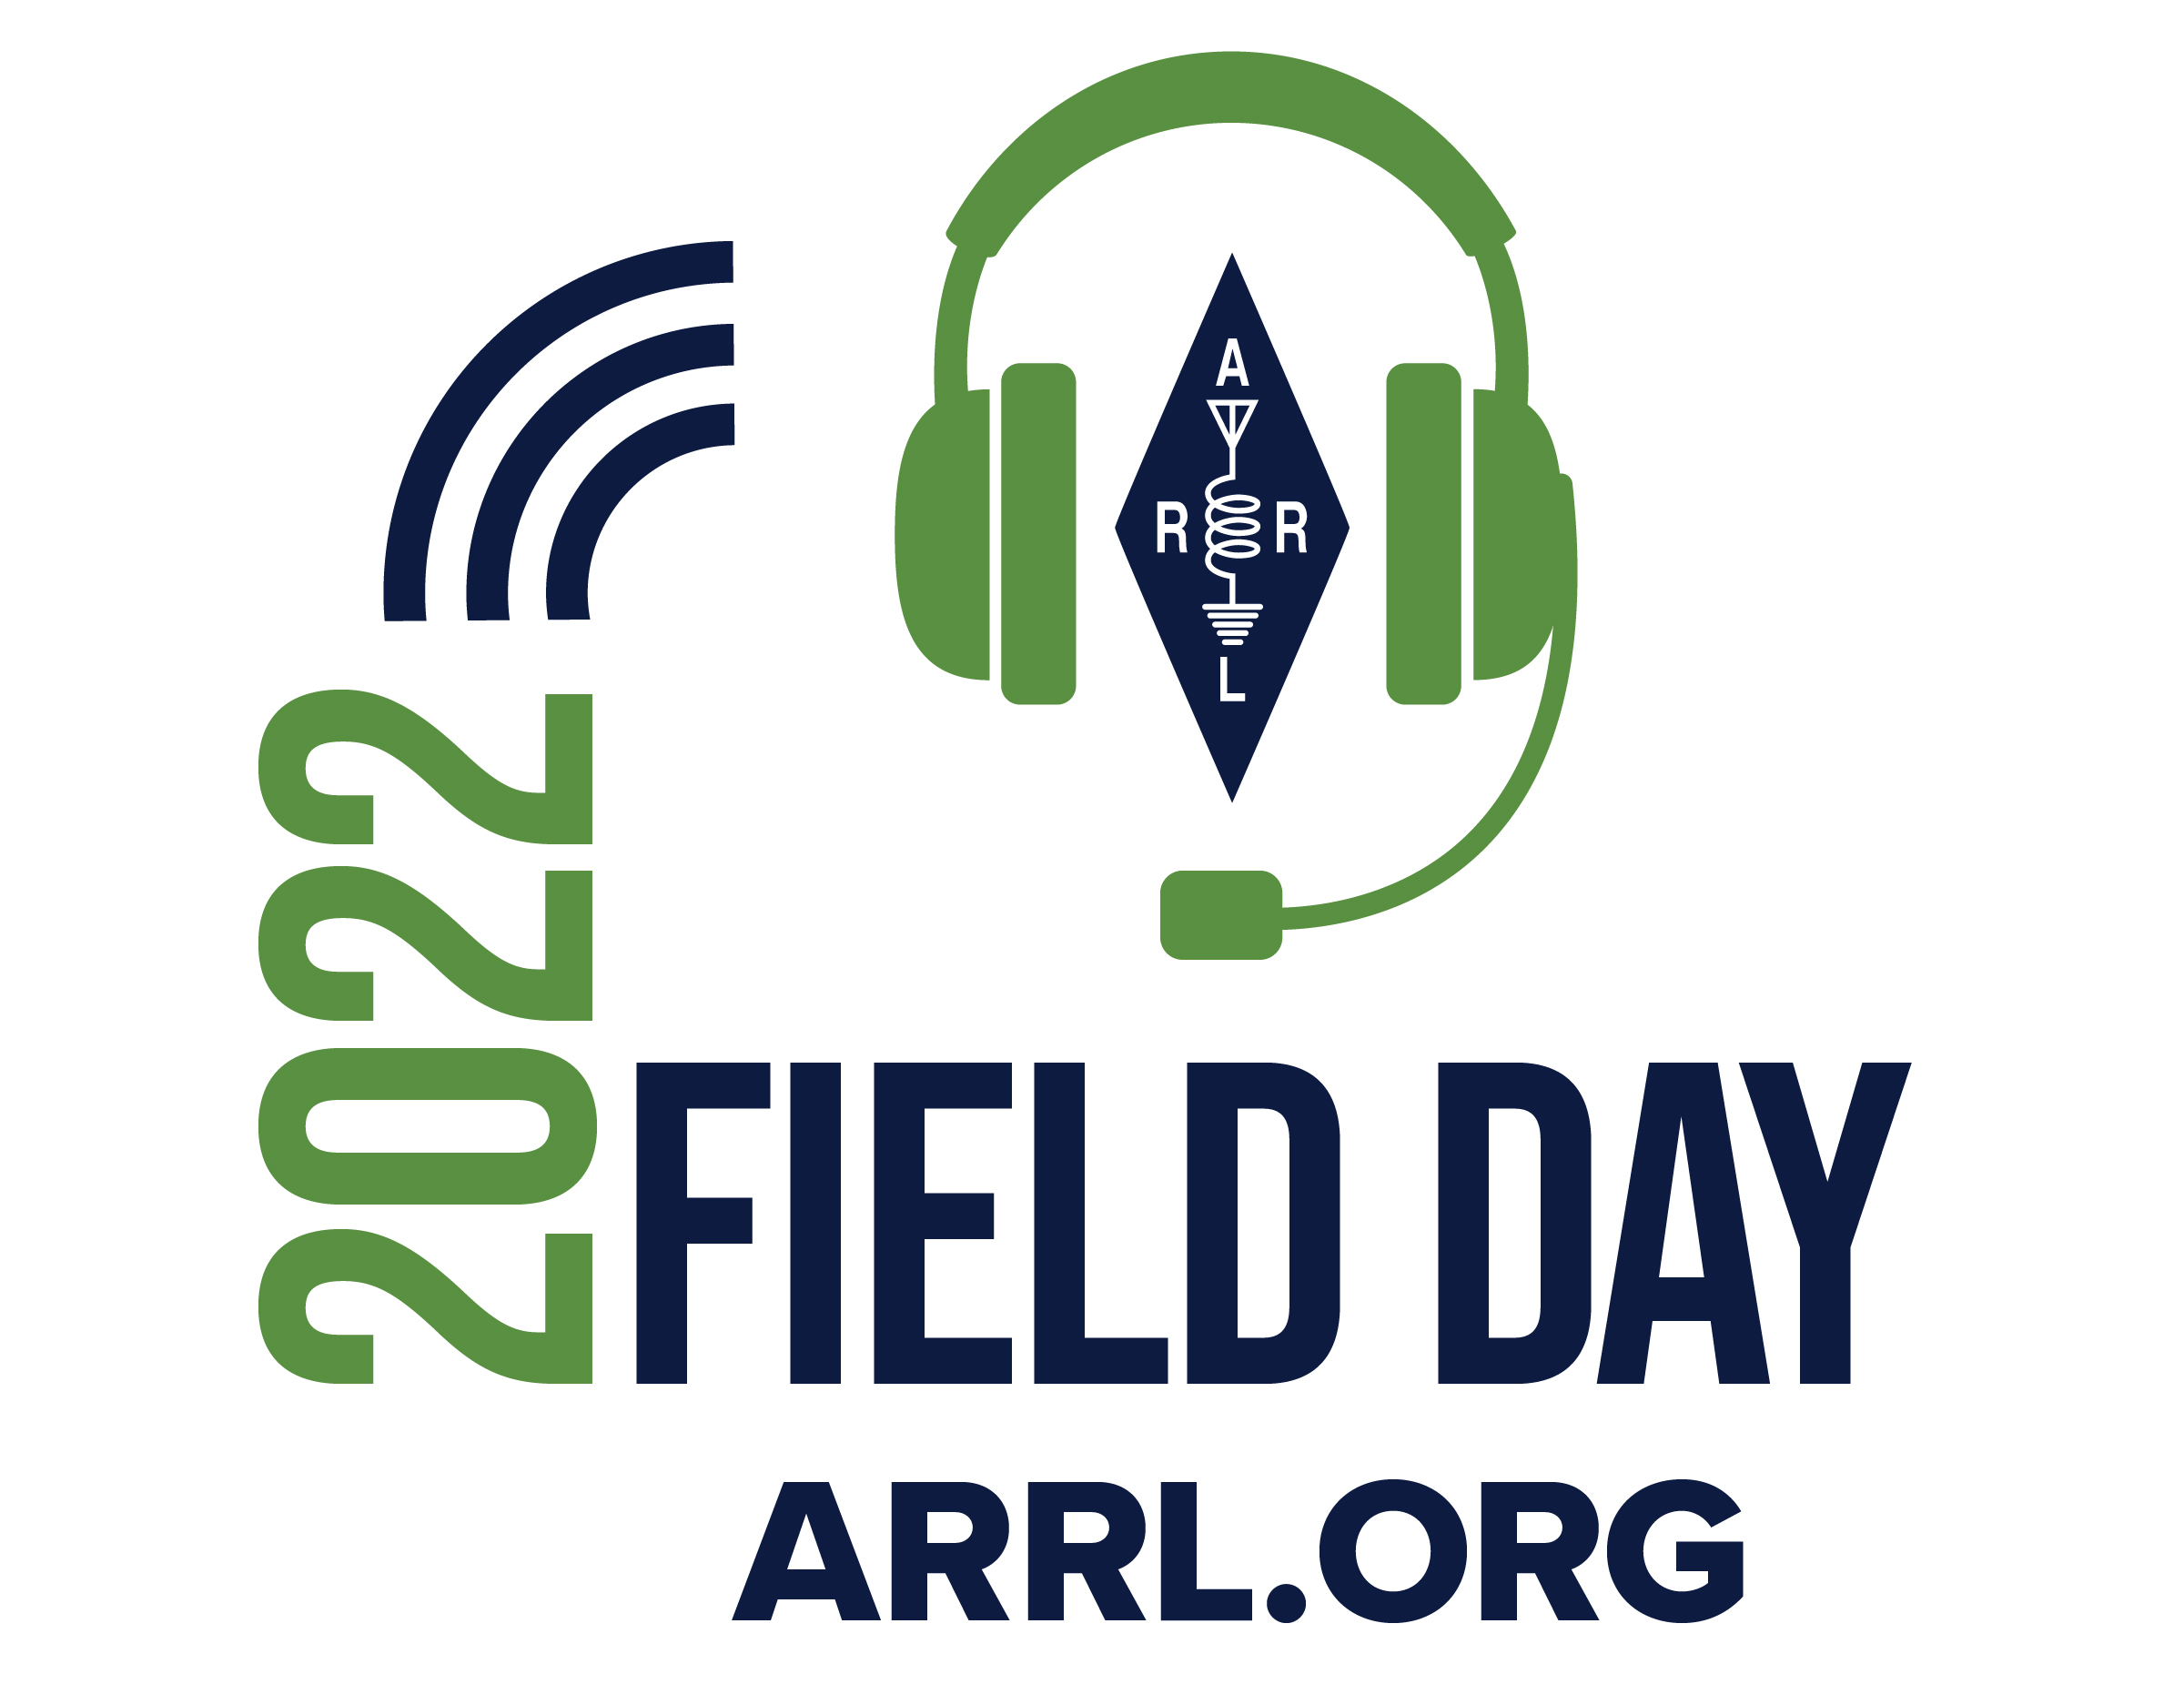 ARRL.org 2022 Field Day logo, featuring the ARRL logo and a headset with a microphone.